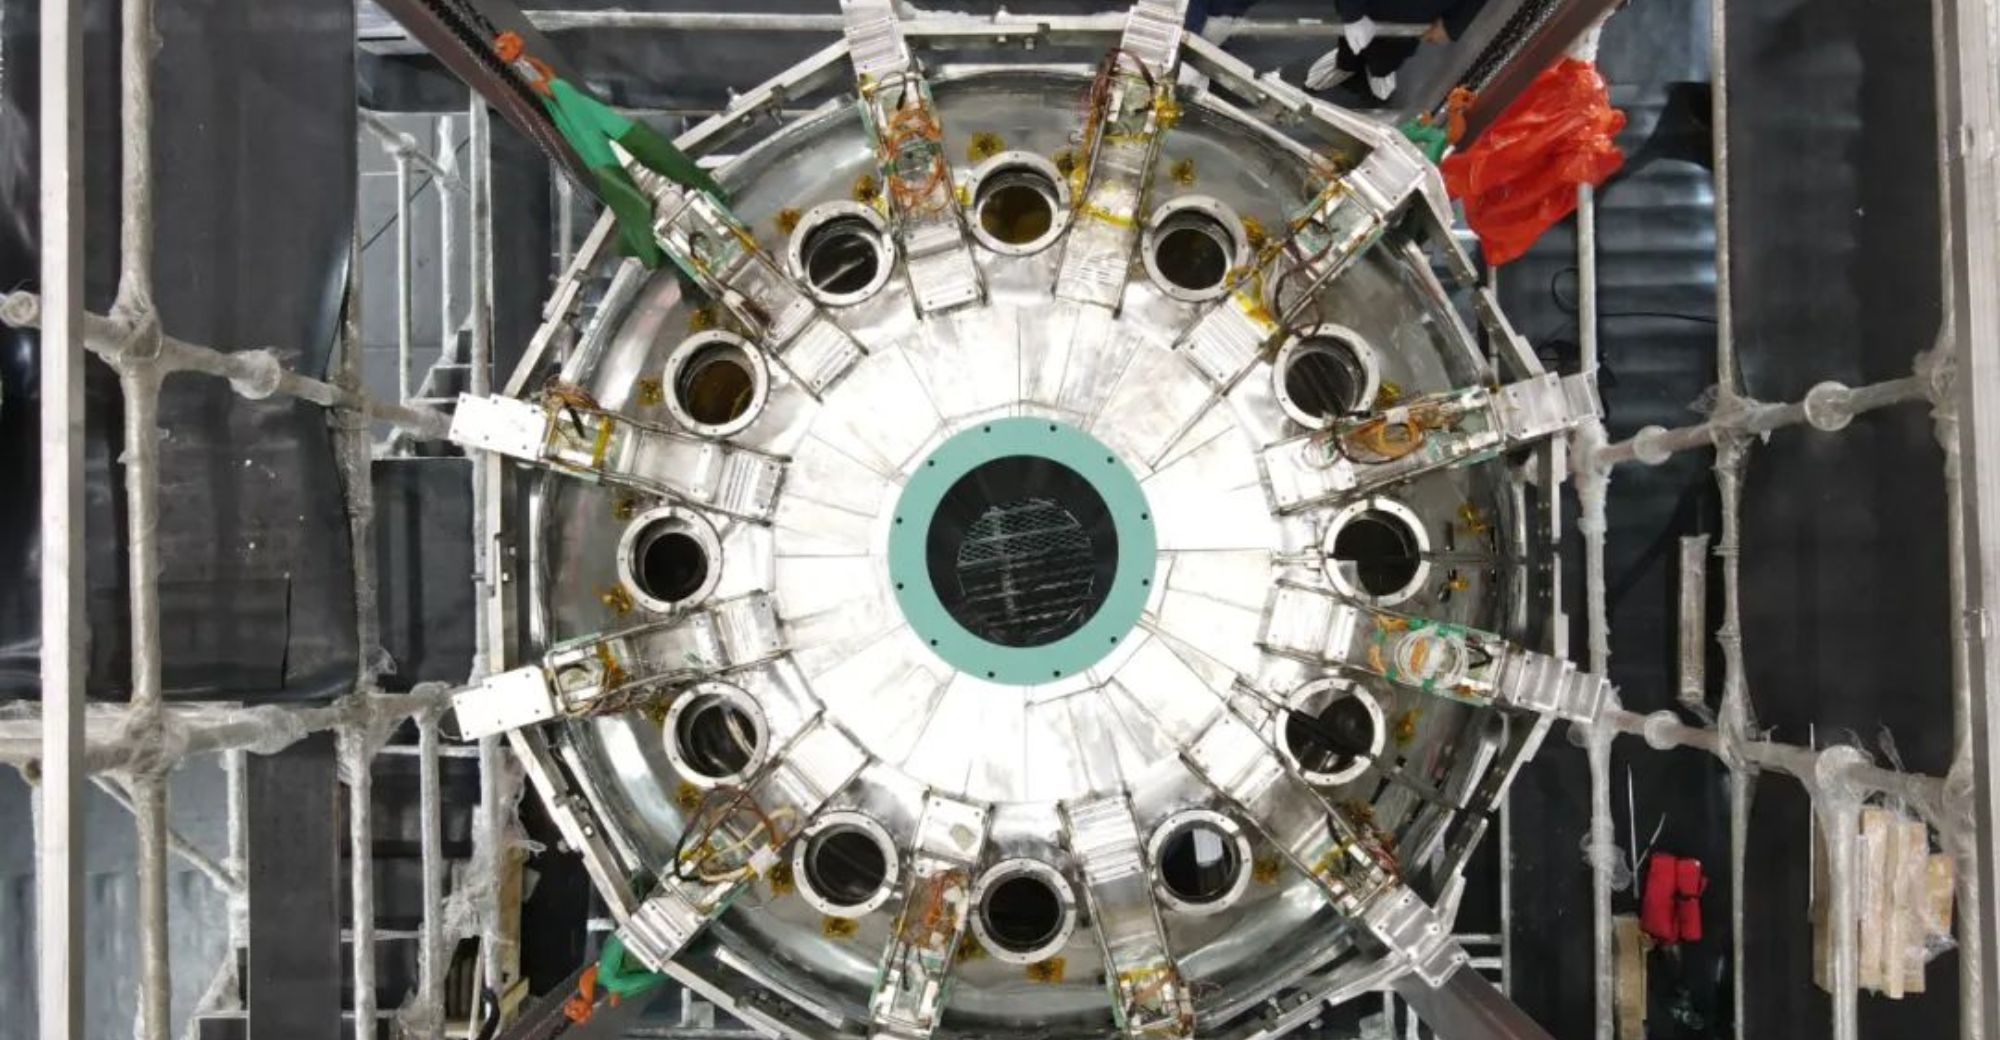 Mihoyo’s Investment in Nuclear Fusion Reaches Milestone with ‘Honghuang 70’ Tokamak Magnet Forming A Loop